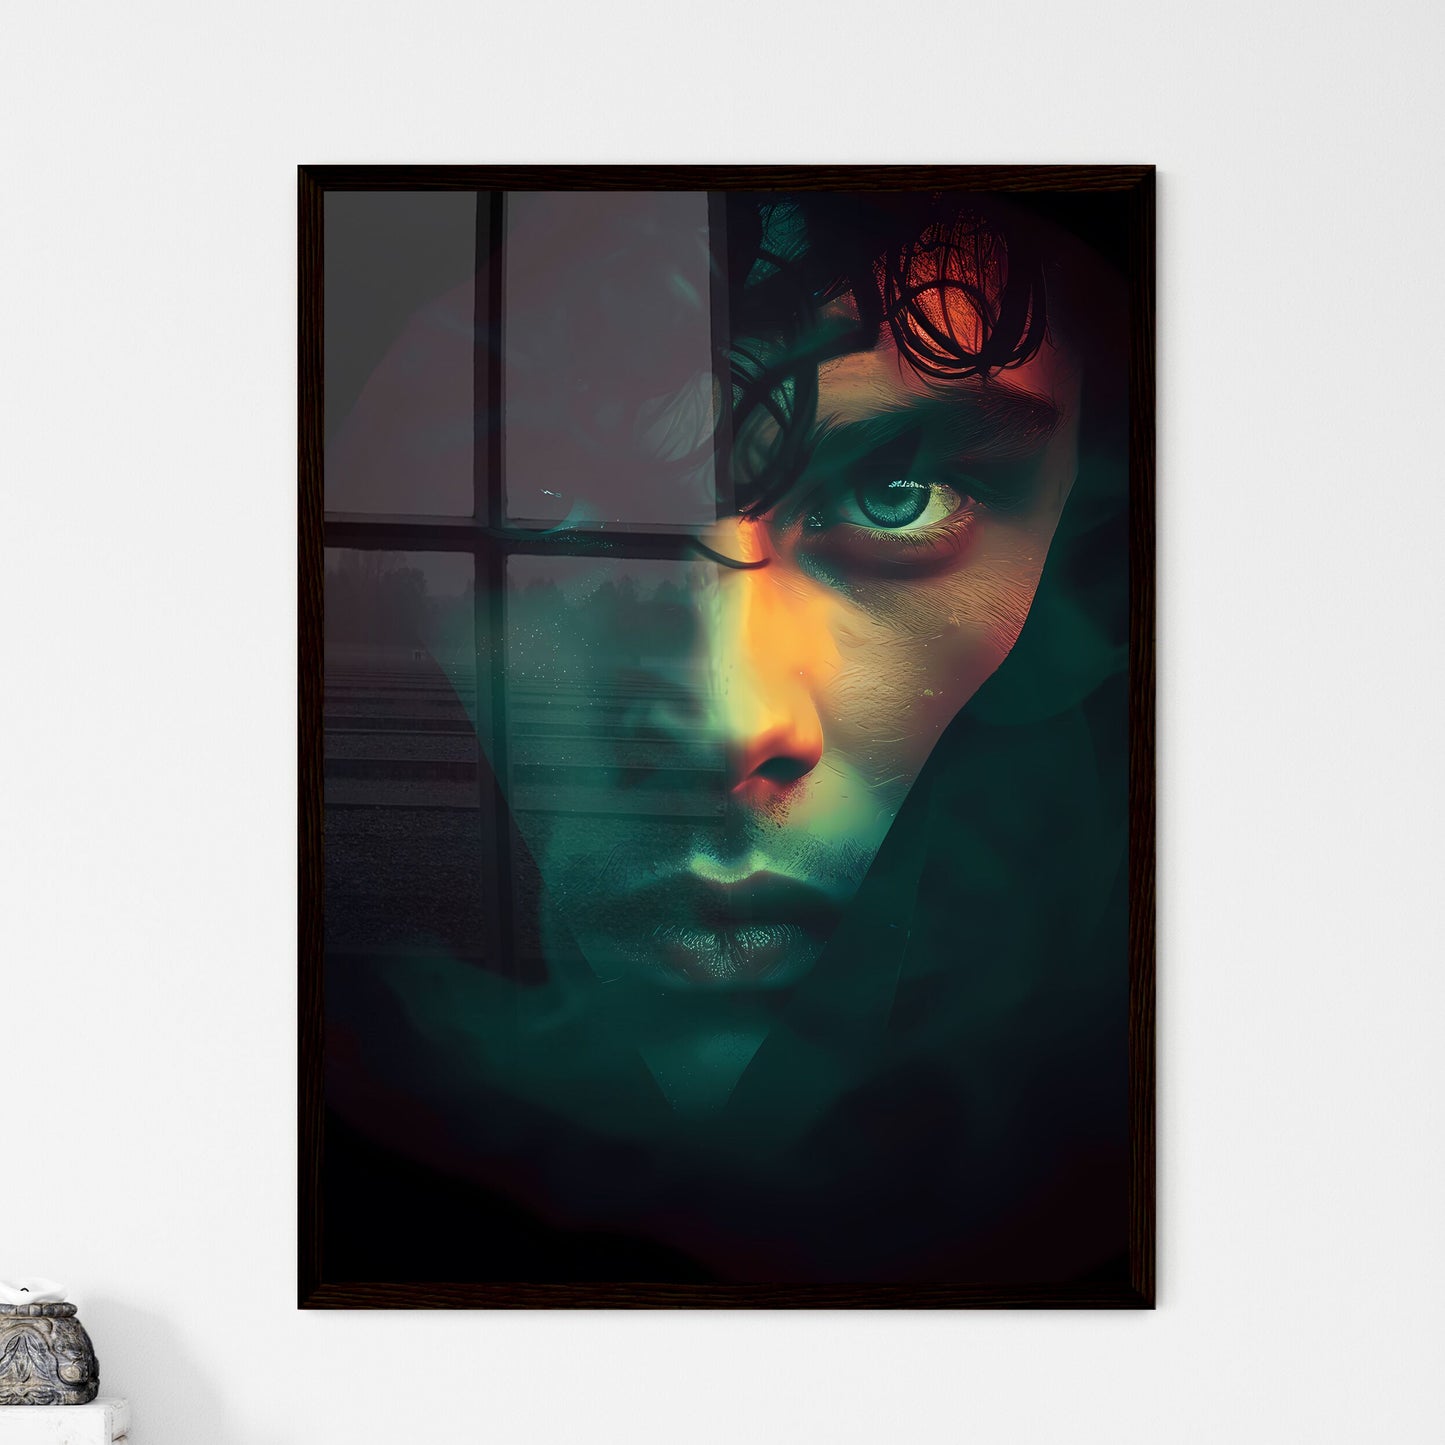 Vibrant Art Painting of a Silhouette Head with Dark Hair and Green Eyes on Black Background Default Title